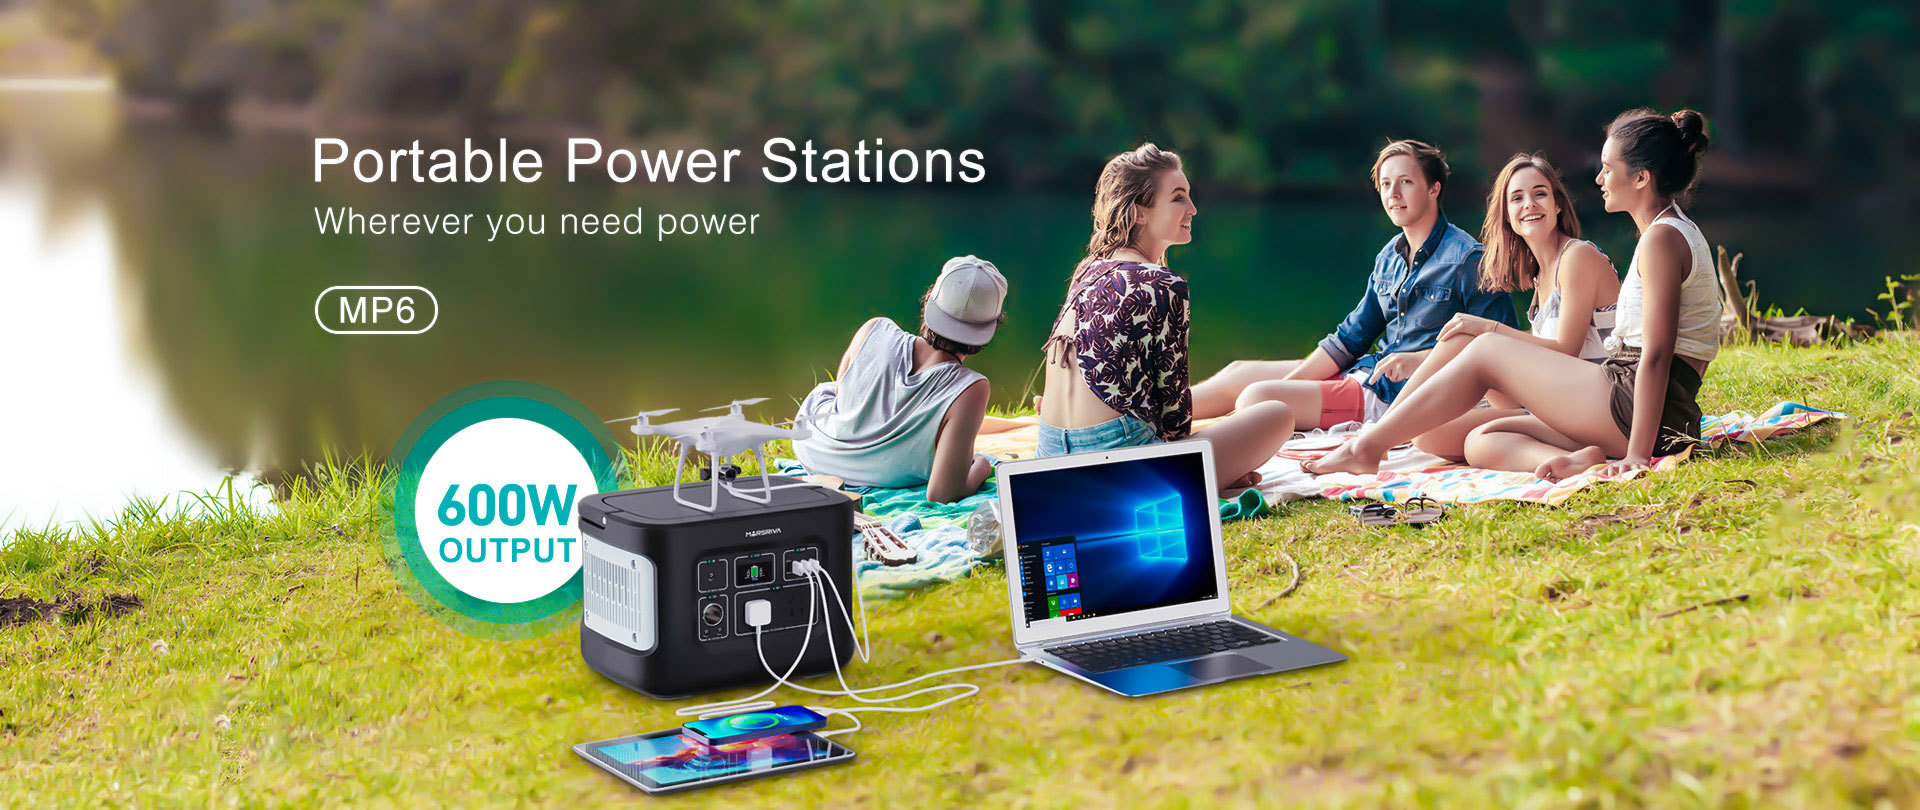 Portable Power Stations MP6